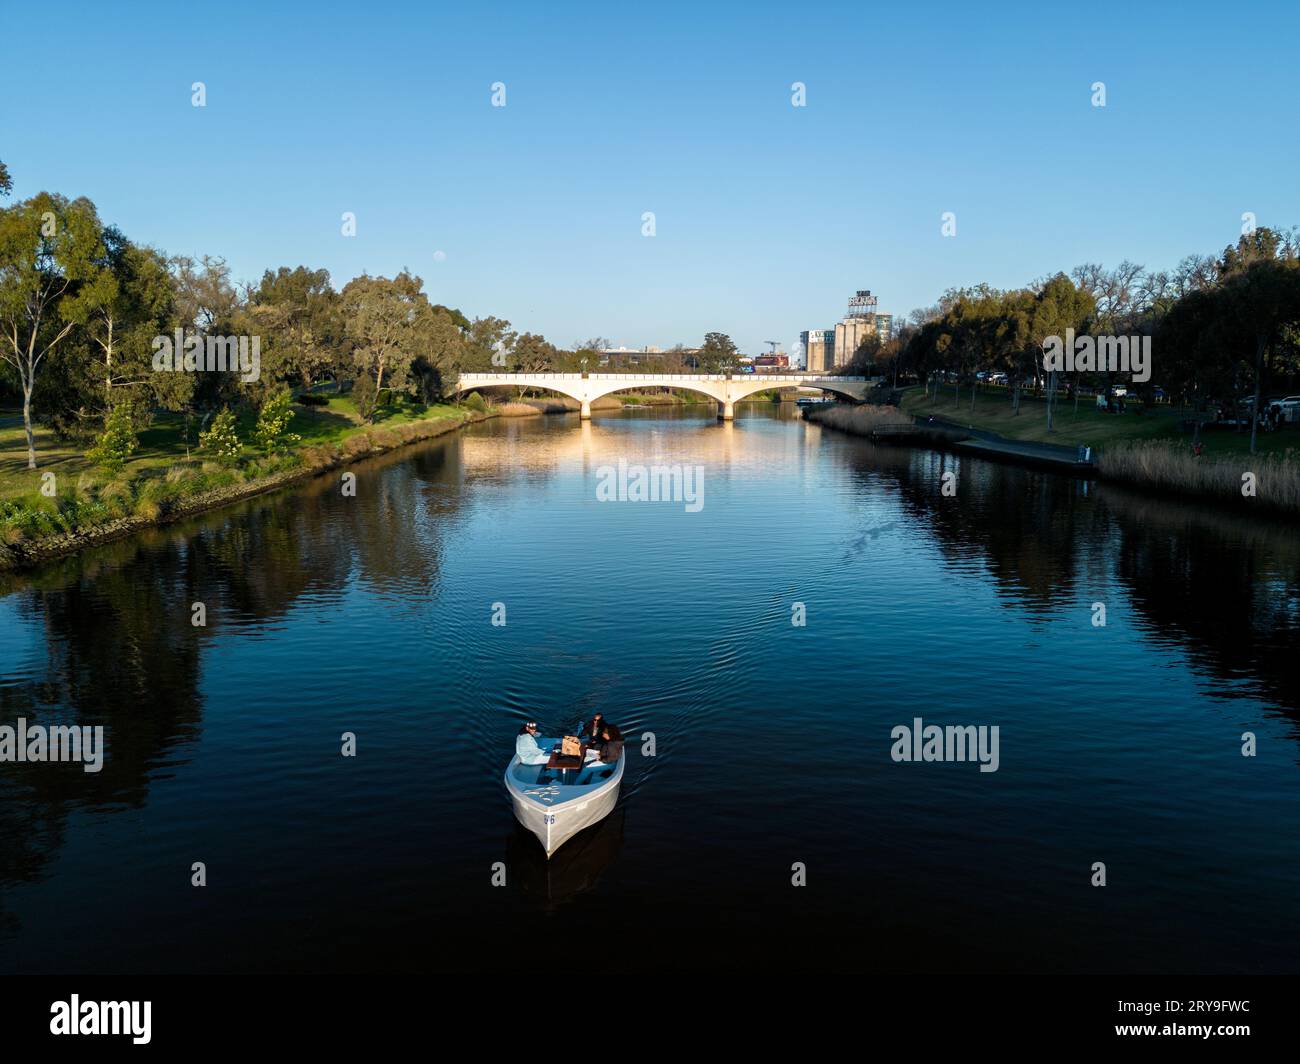 A view of a small boat motoring along the Yarra River in Melbourne, taken in the late afternoon with trees framing the river and a large bridge in the Stock Photo